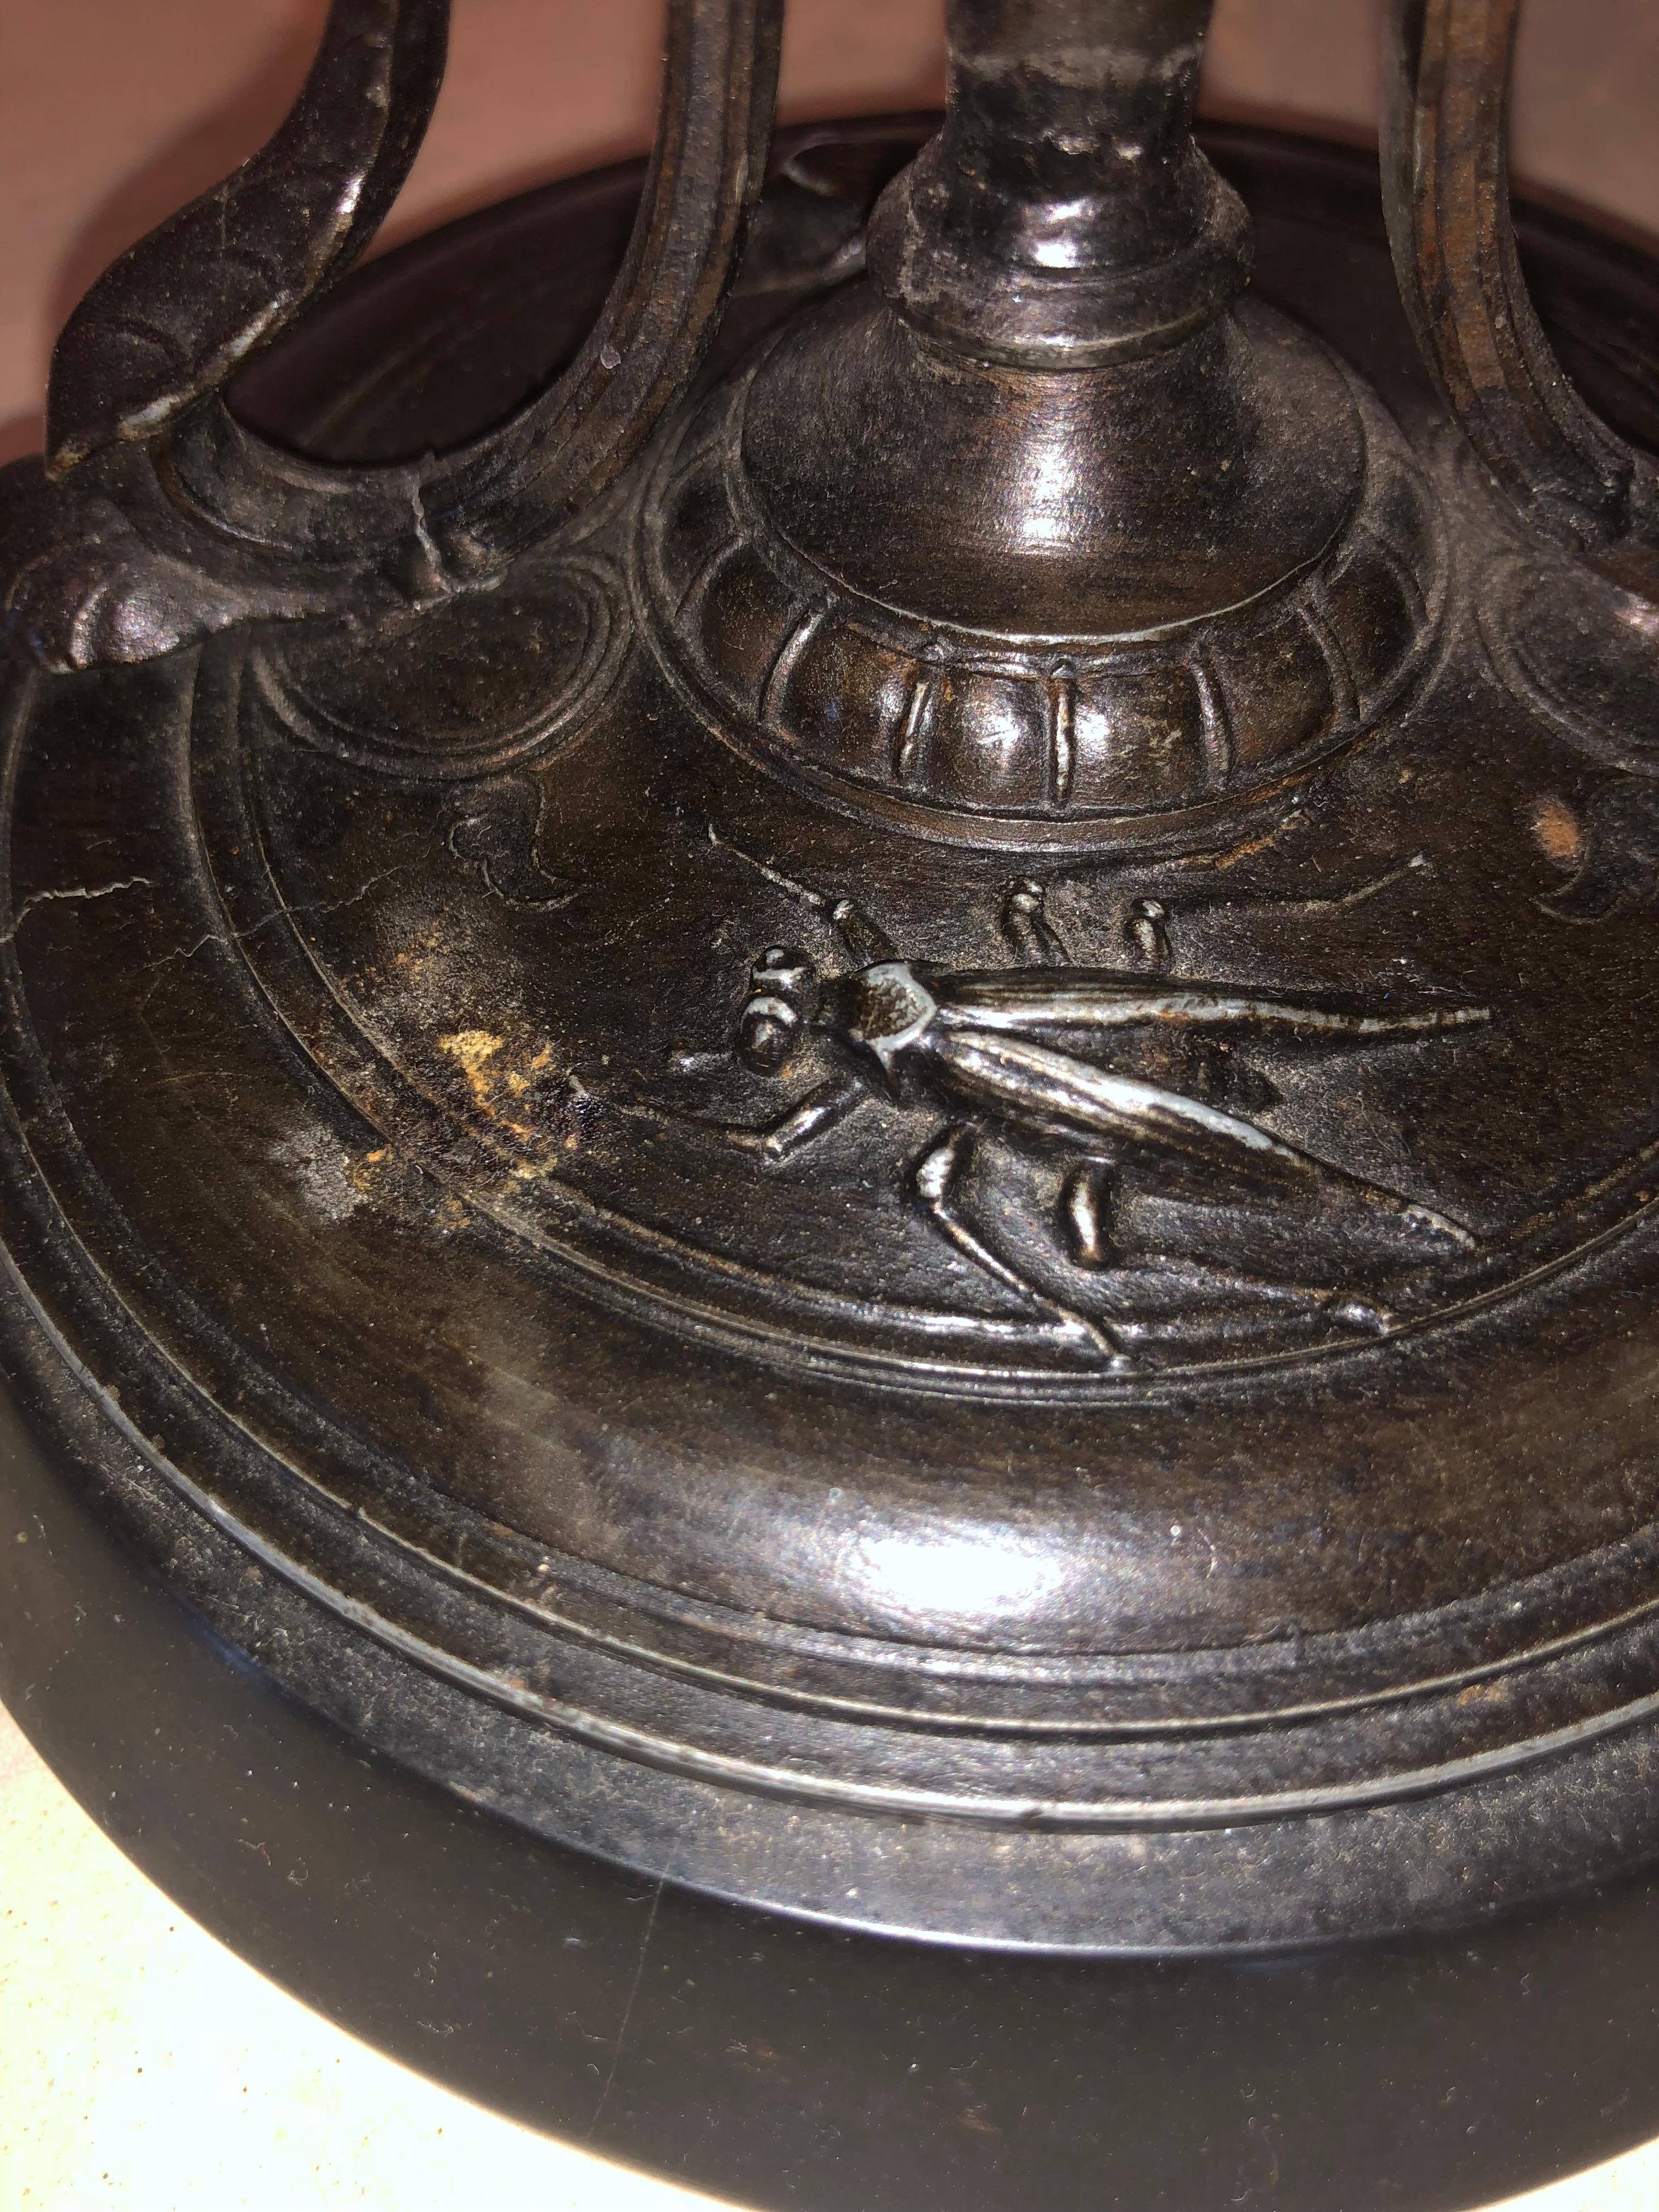 Pair of Empire 19th century bronze candelabras depicting insects. These are quite possibly the finest cast bronze pieces on the market. Each having a center column formed rod with winged full bodied birds leading to a base with insects on the finely